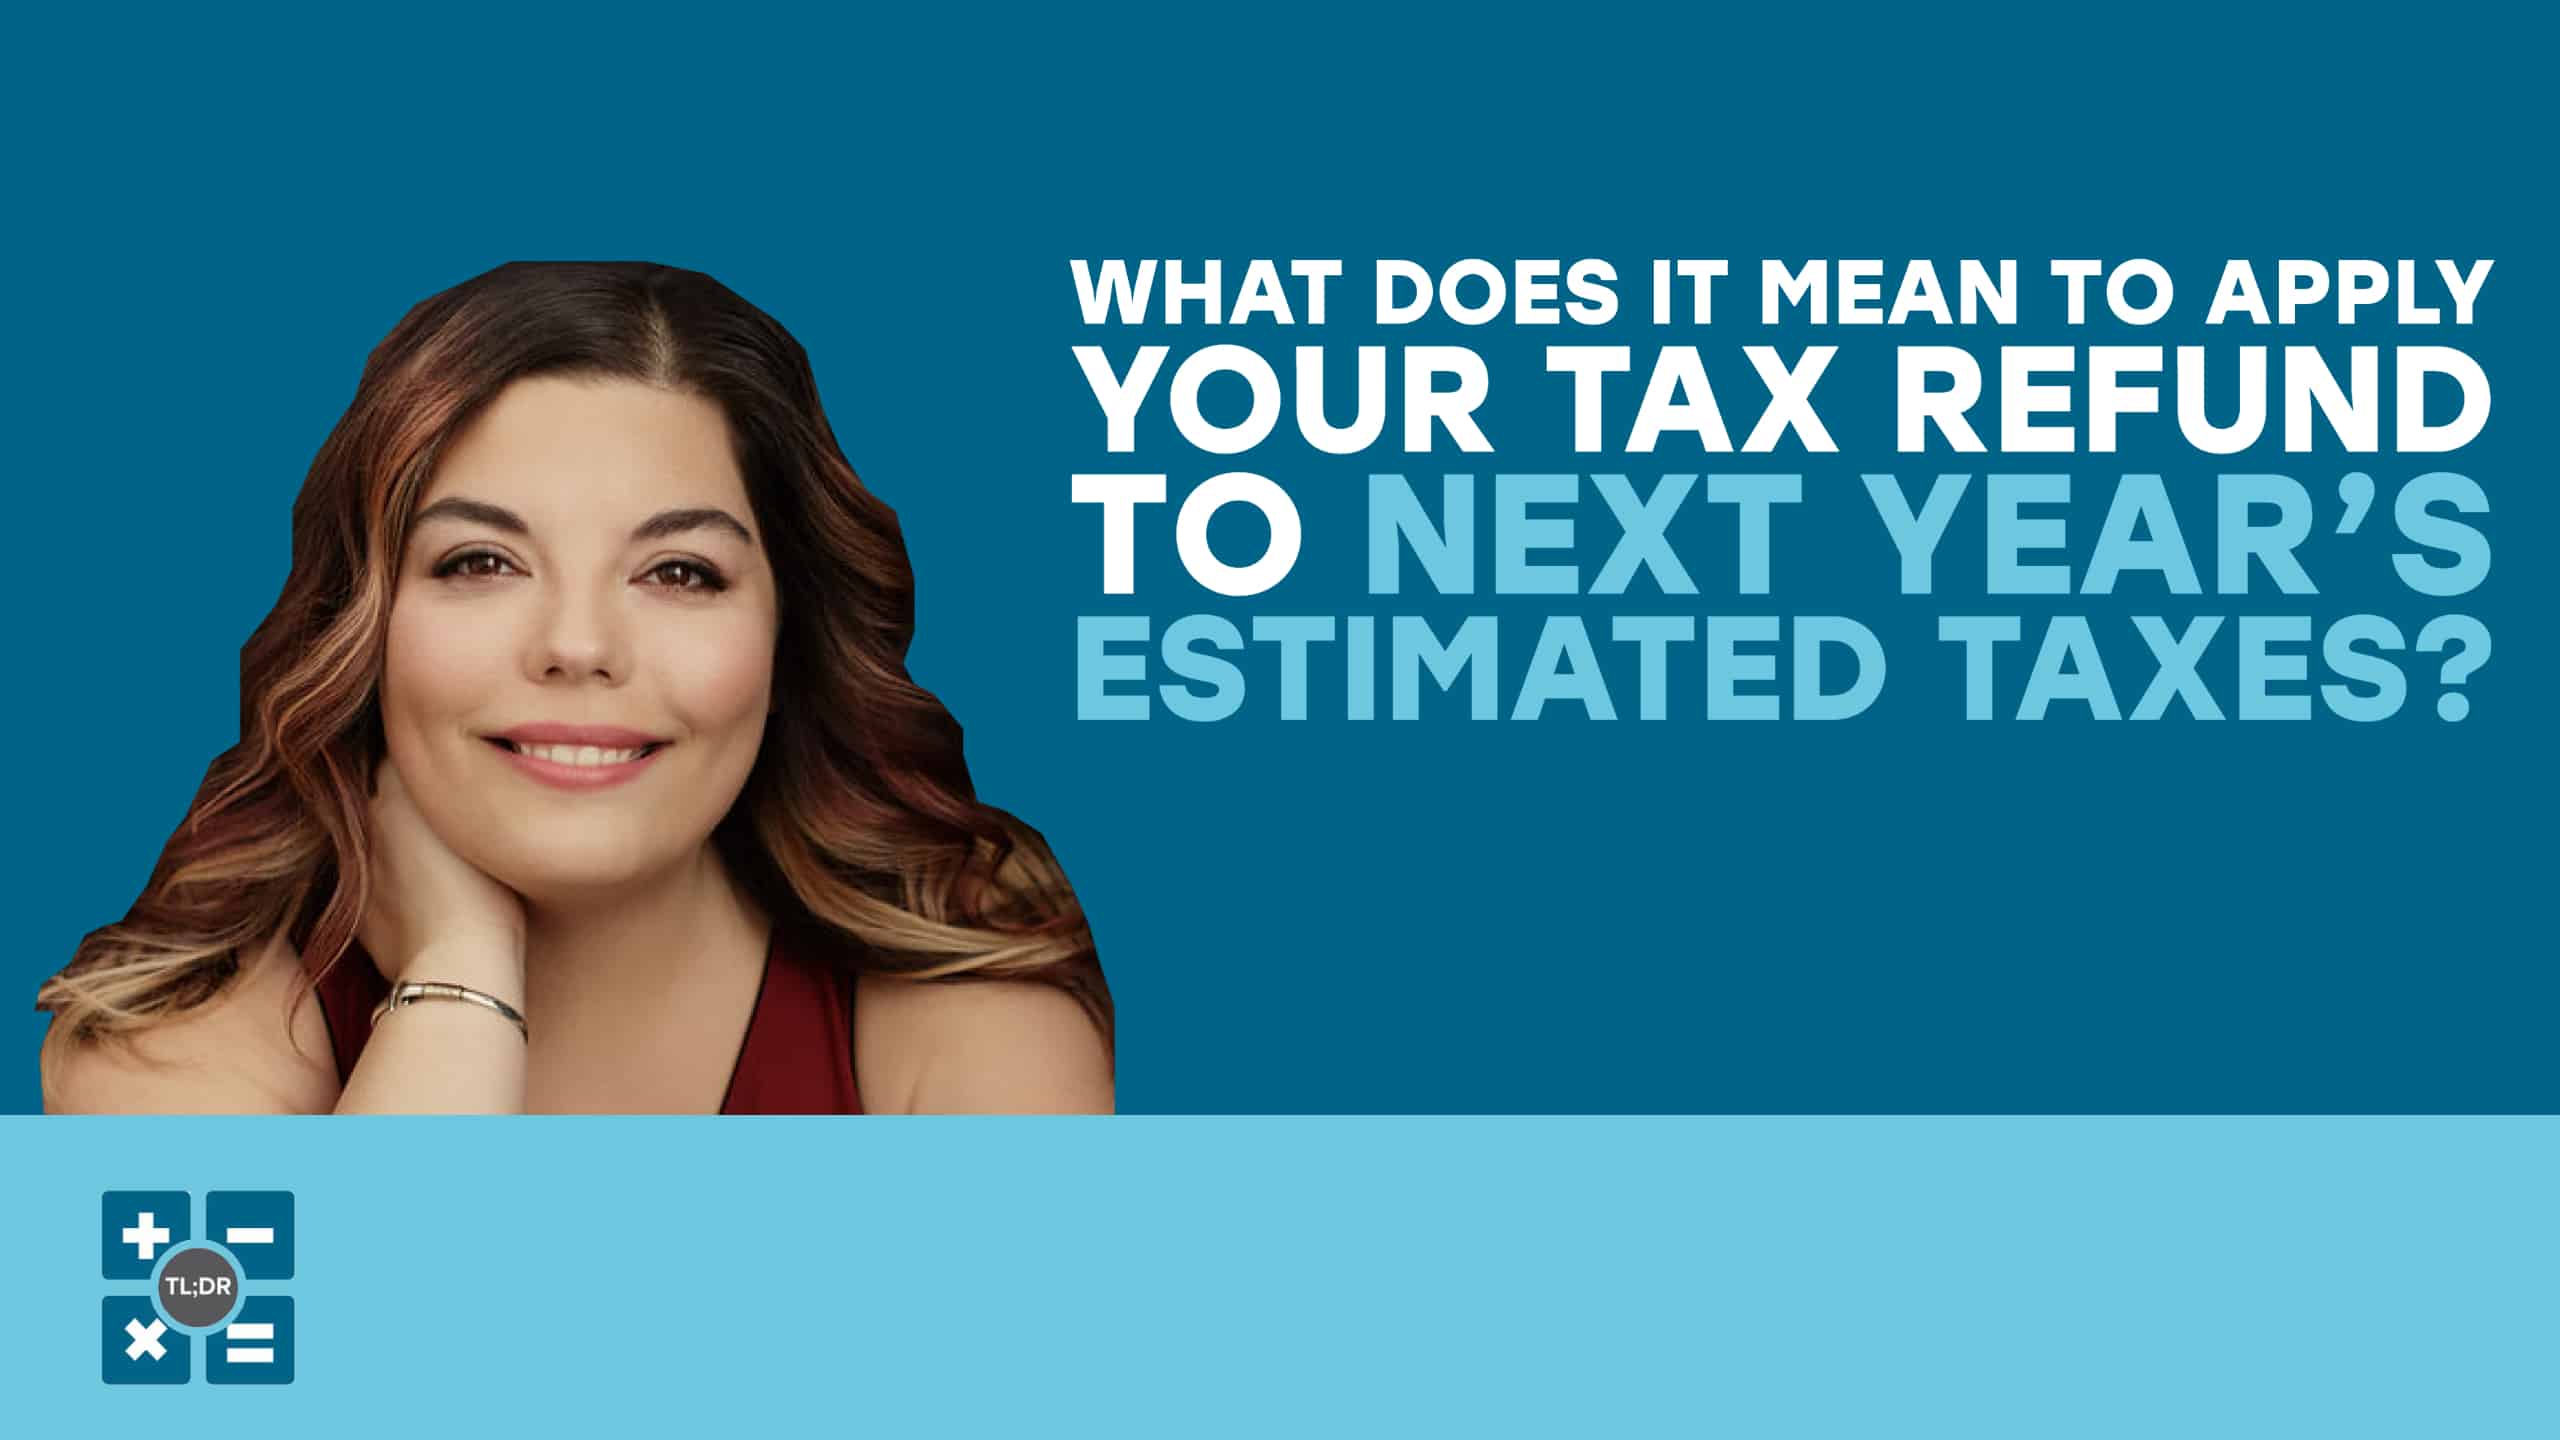 What Does It Mean to Apply Your Tax Refund to Next Year’s Estimated Taxes?